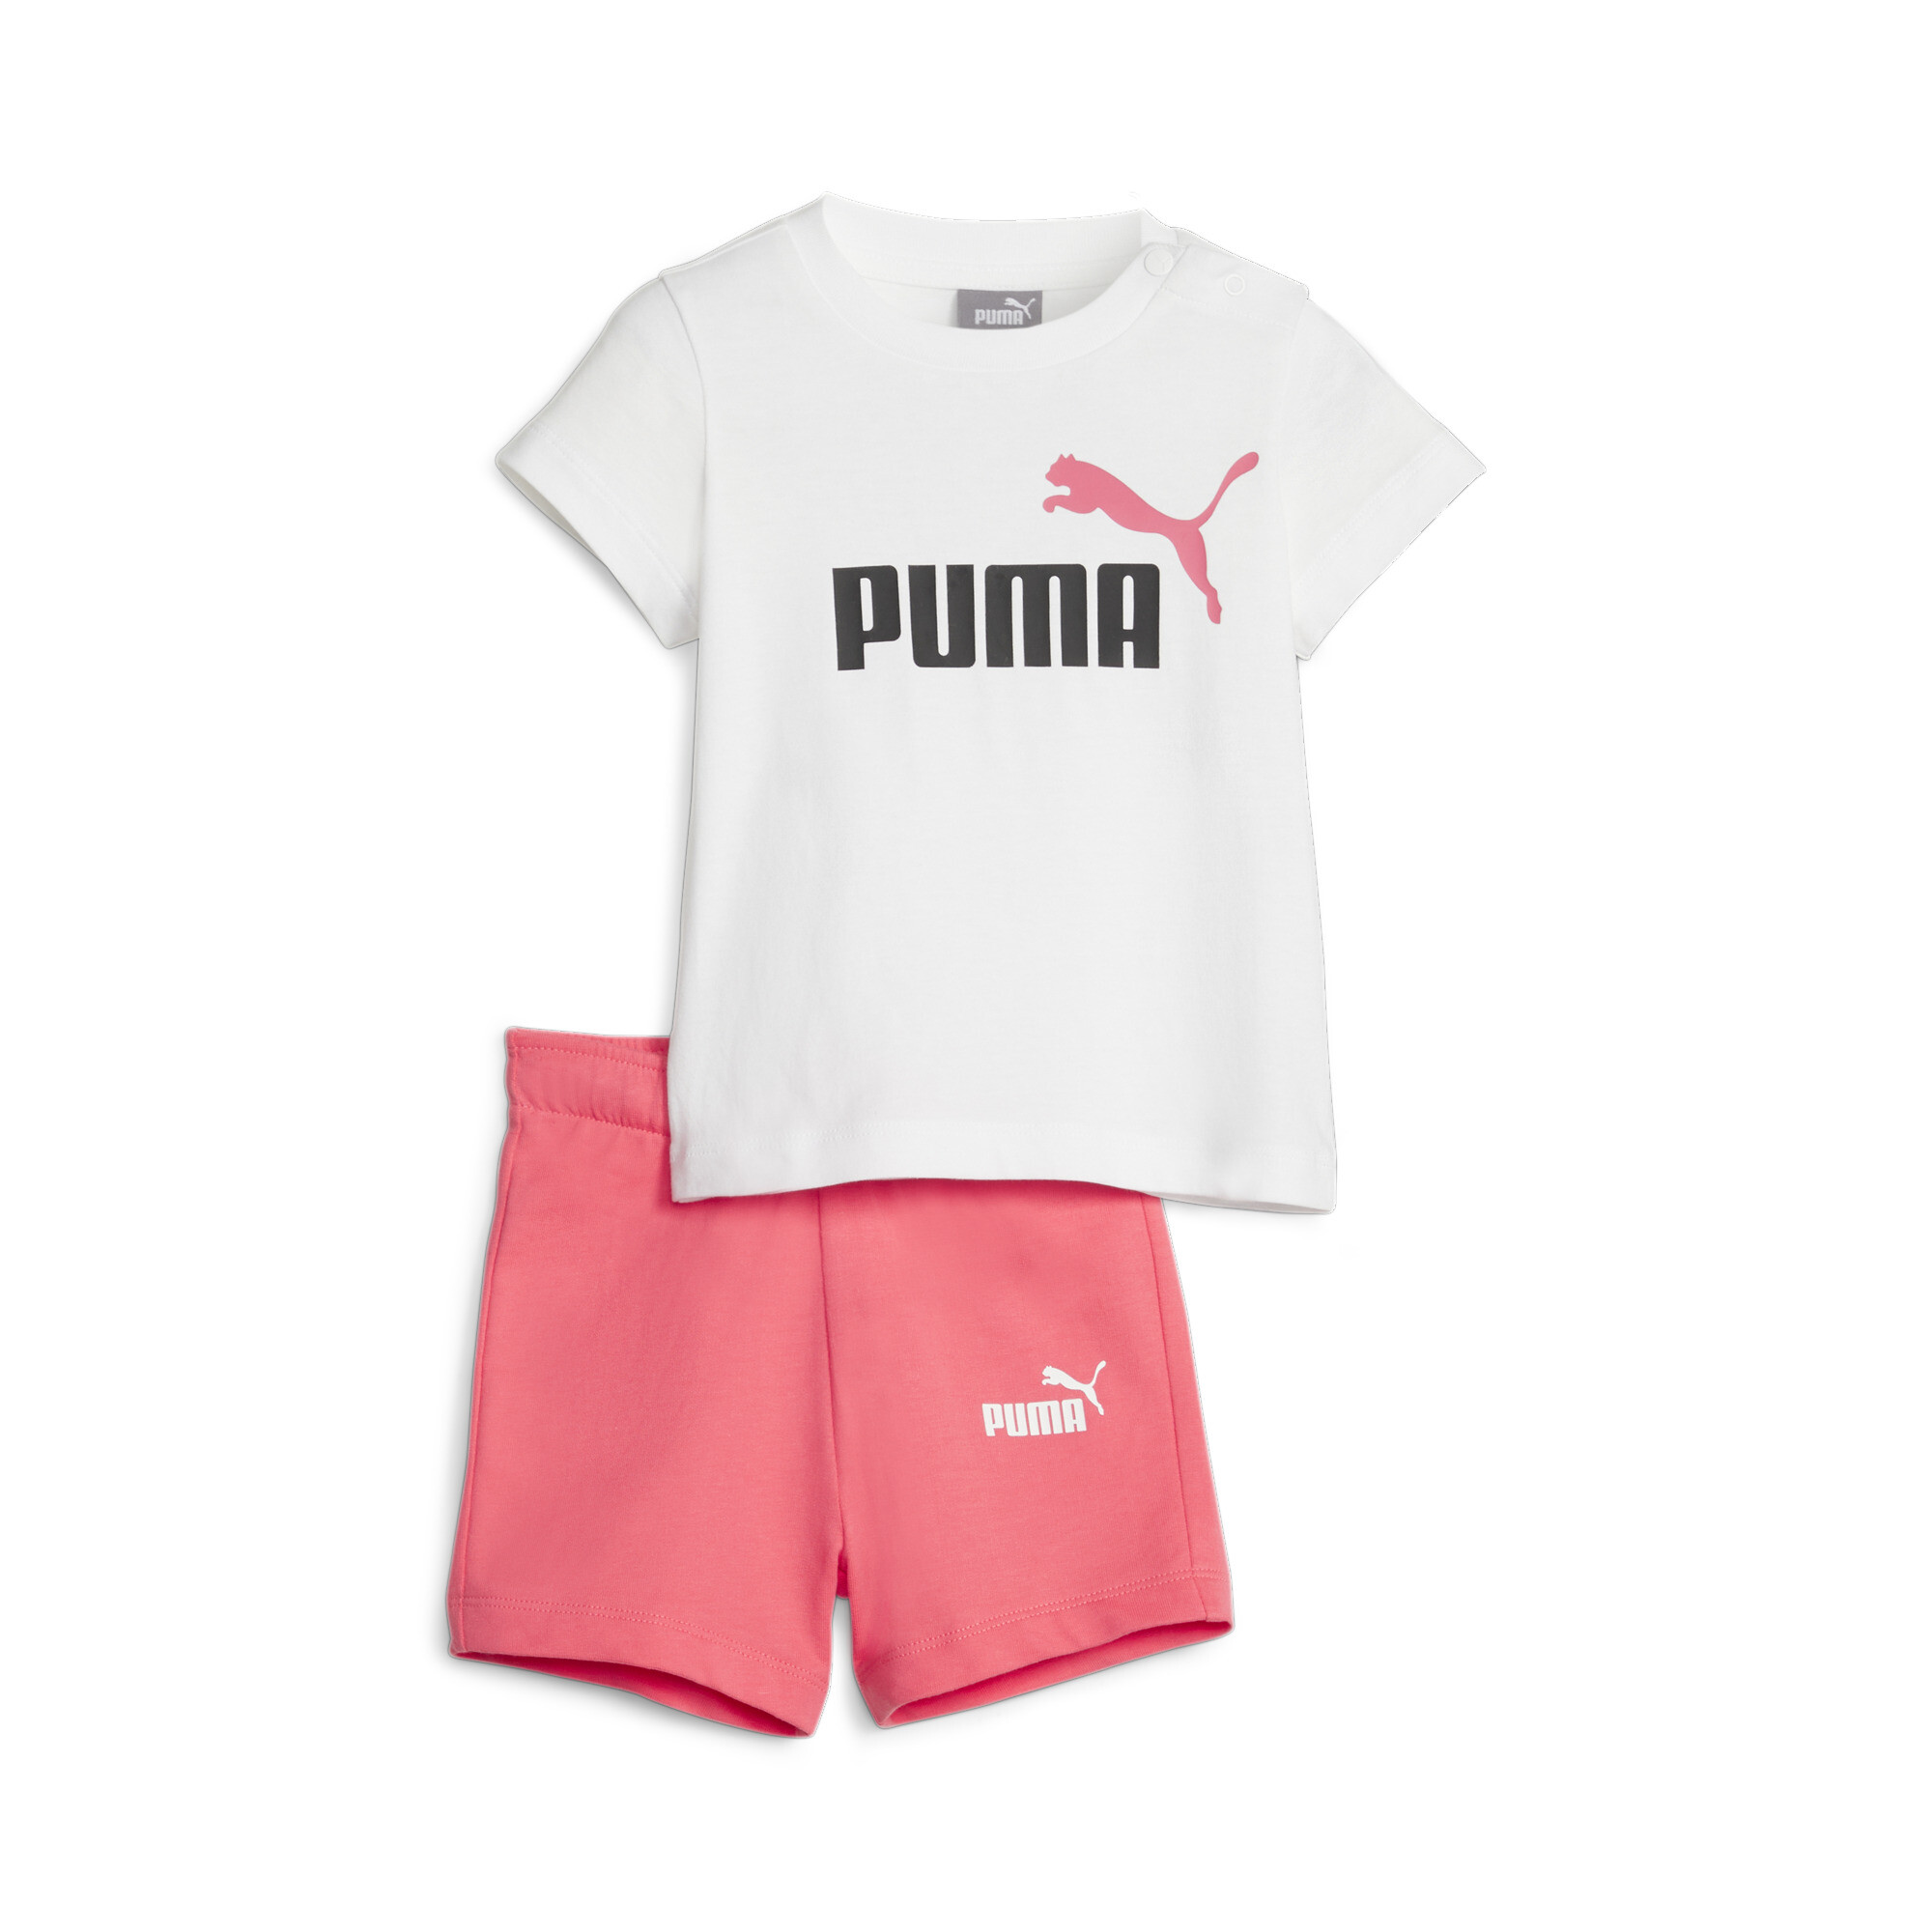 PUMA Minicats T-Shirt And Shorts Babies' Set In Pink, Size 1-2 Youth